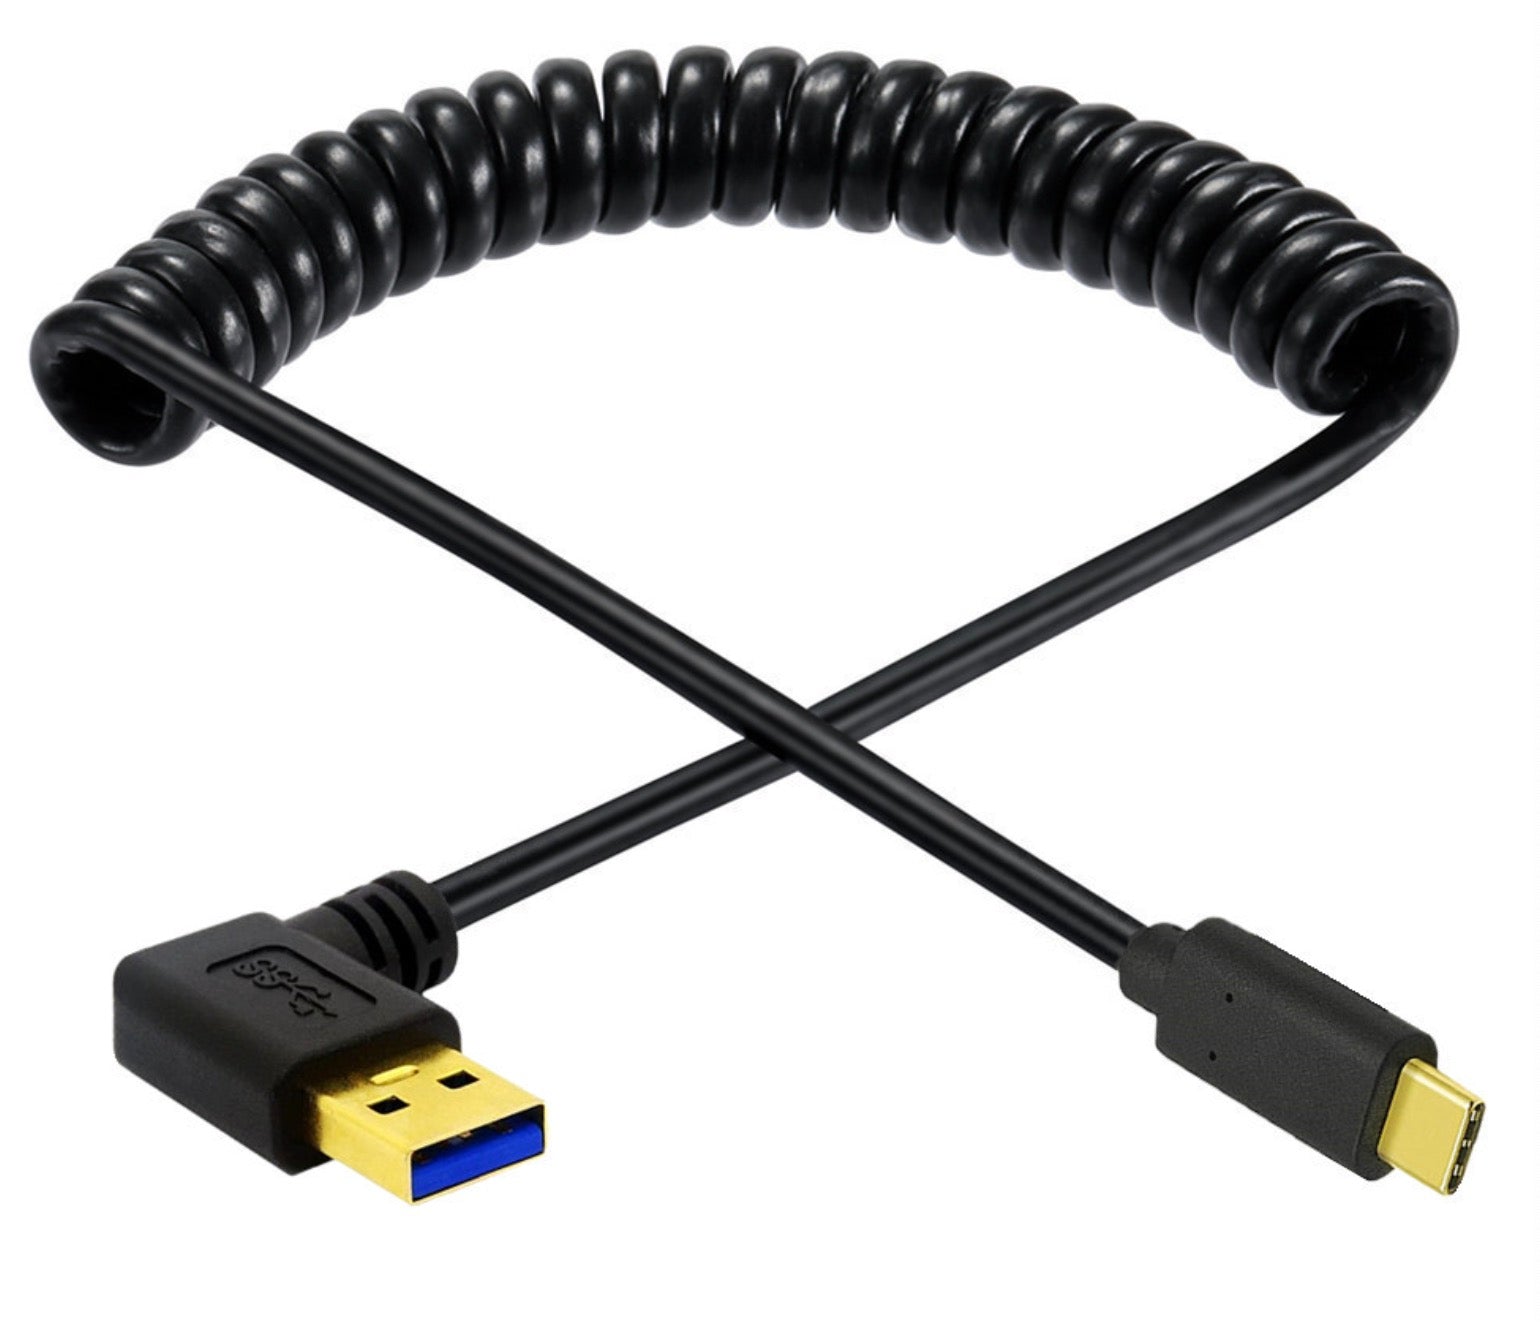 USB C Type-C Male to USB 3.0 A Type Male Coiled Cable - Left Angle